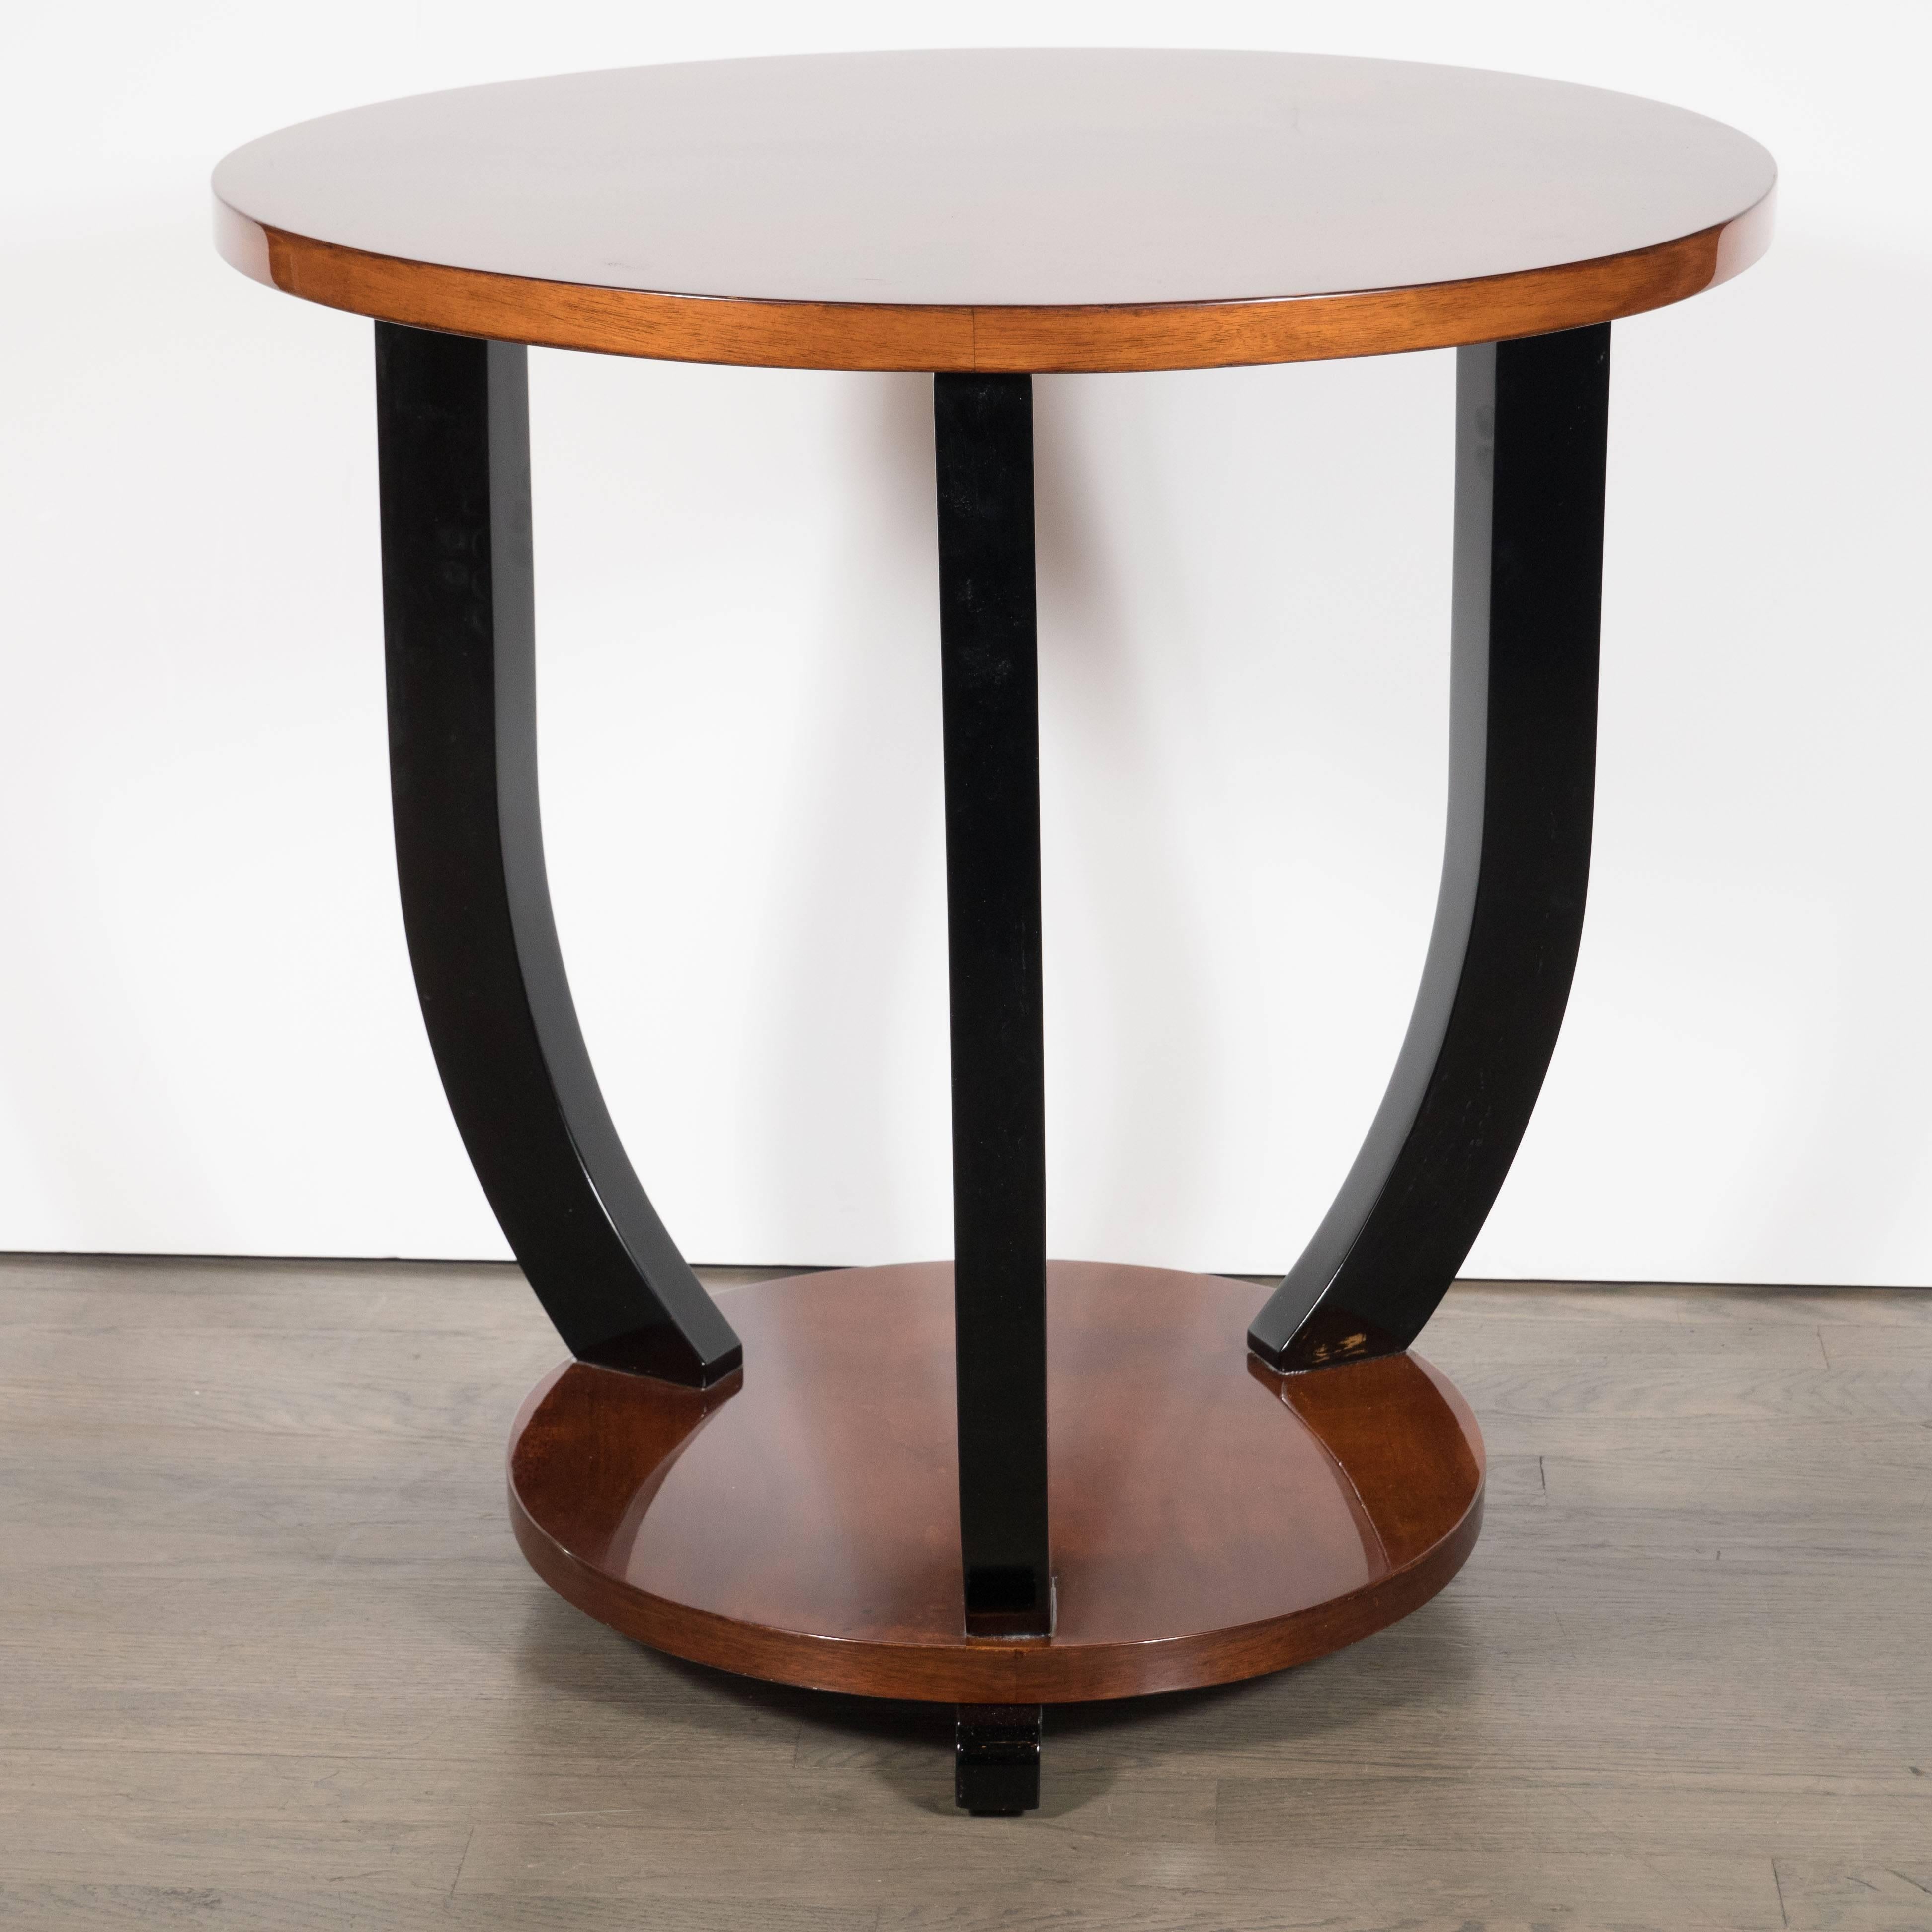 French Art Deco Two-Tiered Bookmatched Walnut & Black Lacquer Gueridon Table In Excellent Condition For Sale In New York, NY